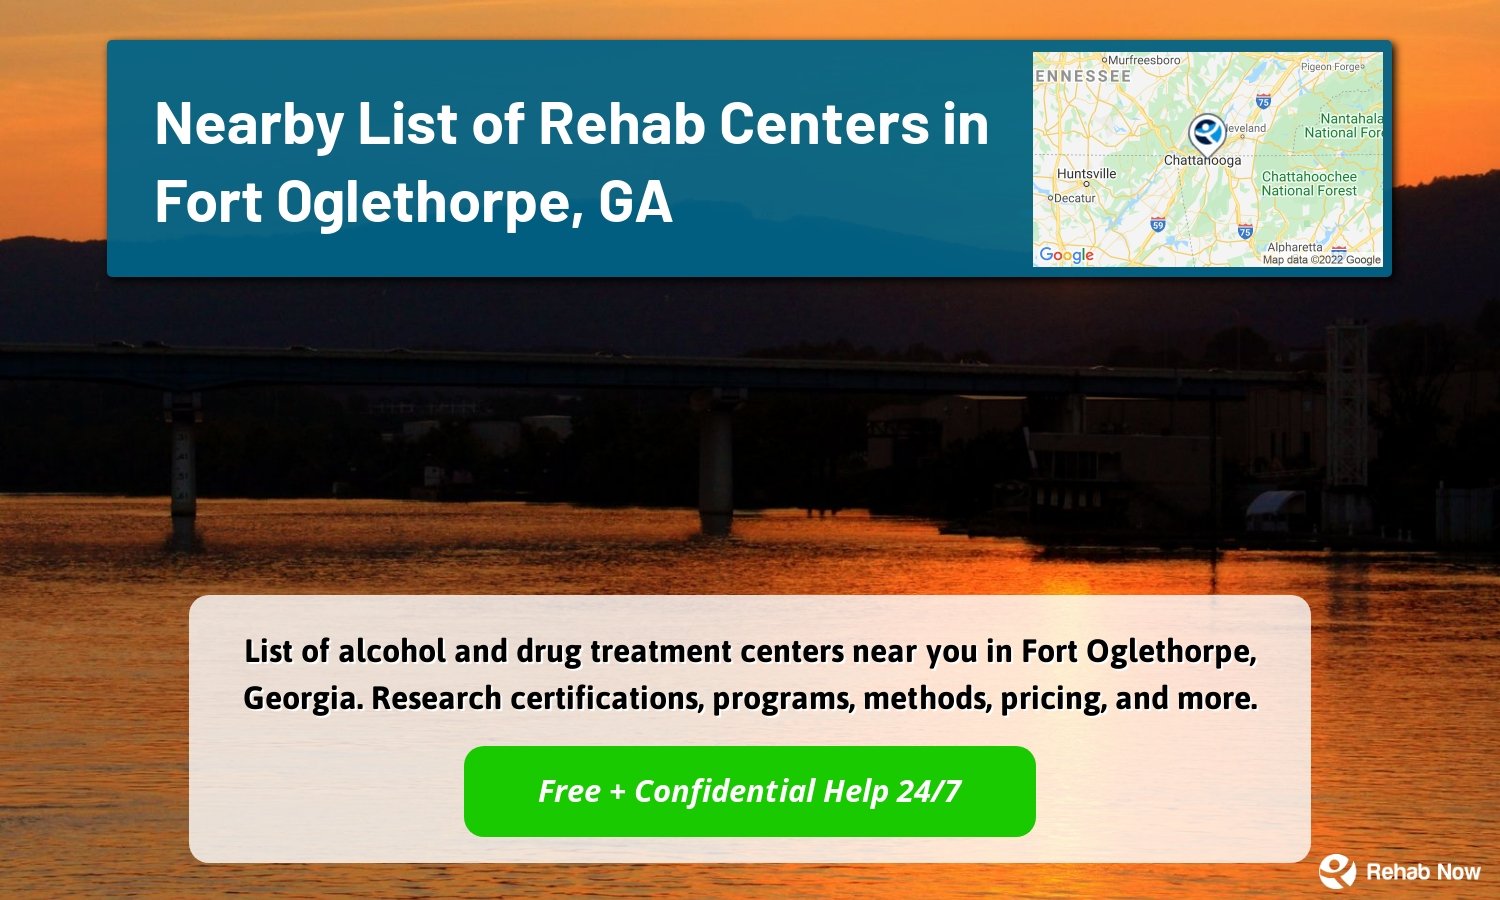 List of alcohol and drug treatment centers near you in Fort Oglethorpe, Georgia. Research certifications, programs, methods, pricing, and more.